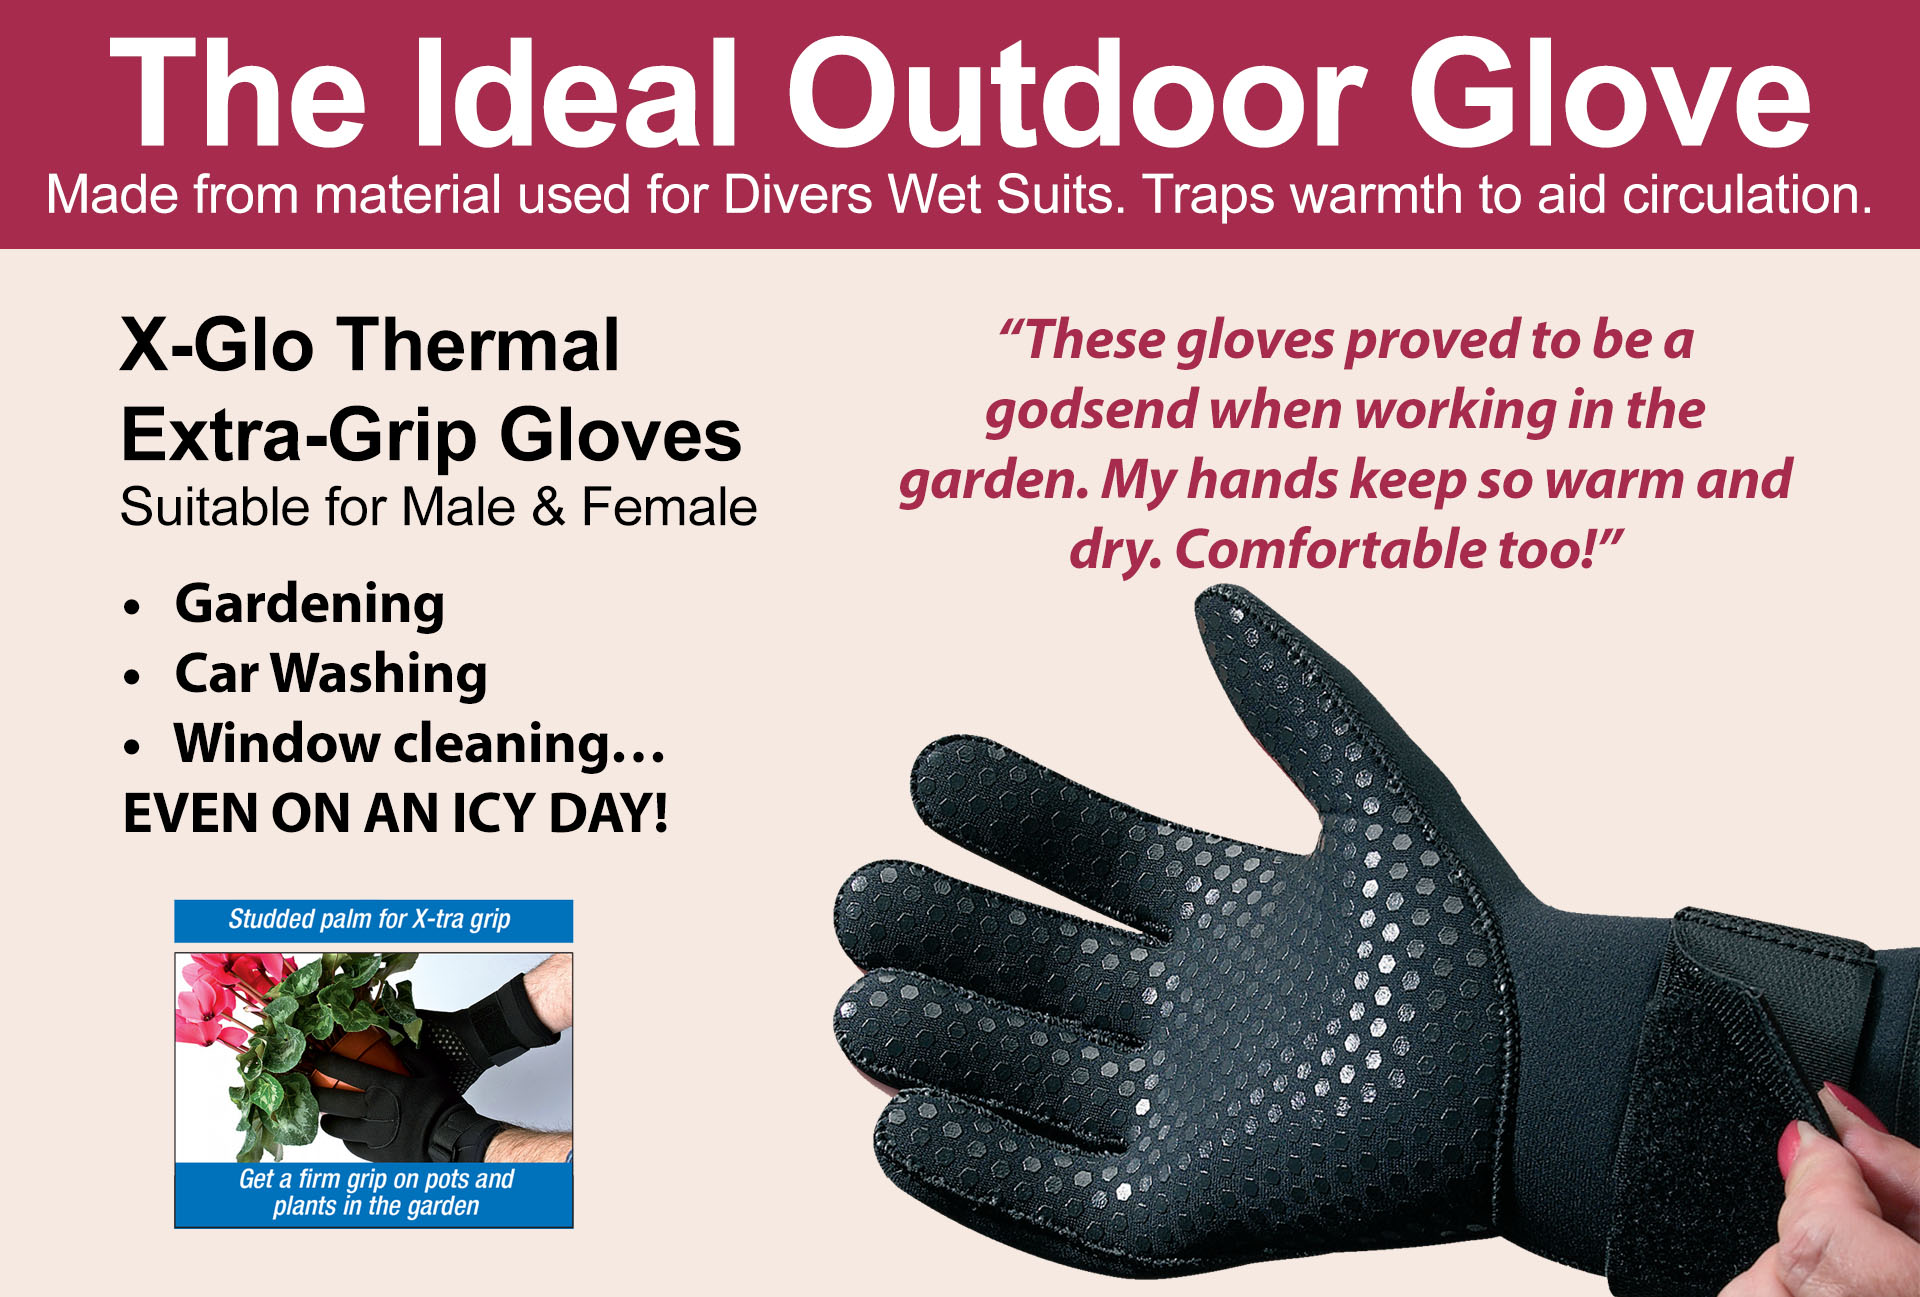 X-Glo Thermal Extra Grip Gloves